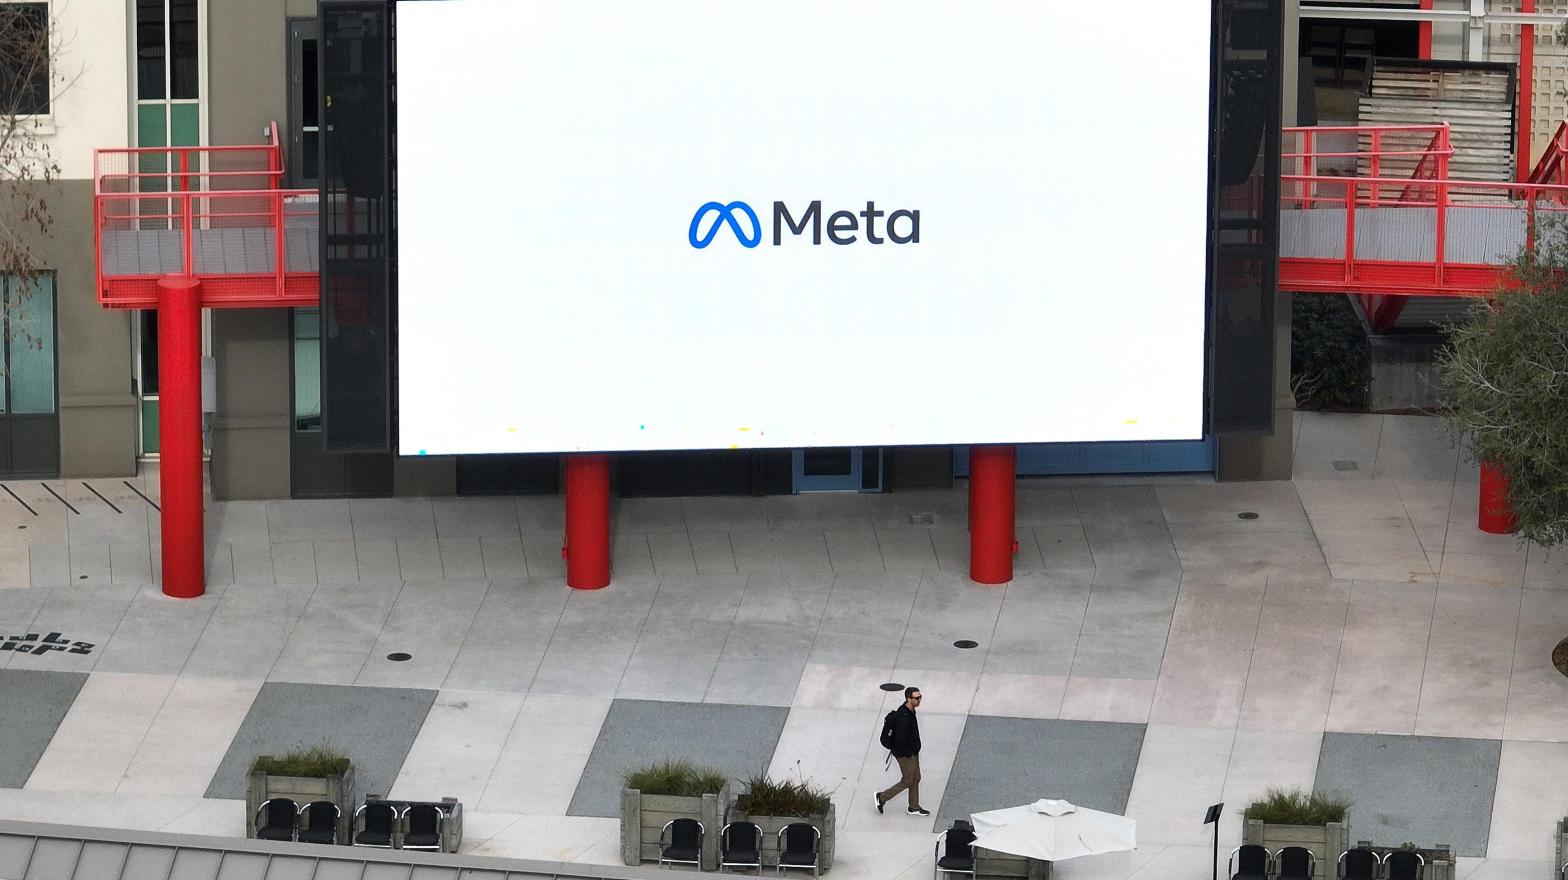 Meta is planning a Twitter-like app, but reports say it could be using Instagram as a springboard. (Photo: Justin Sullivan, Getty Images)